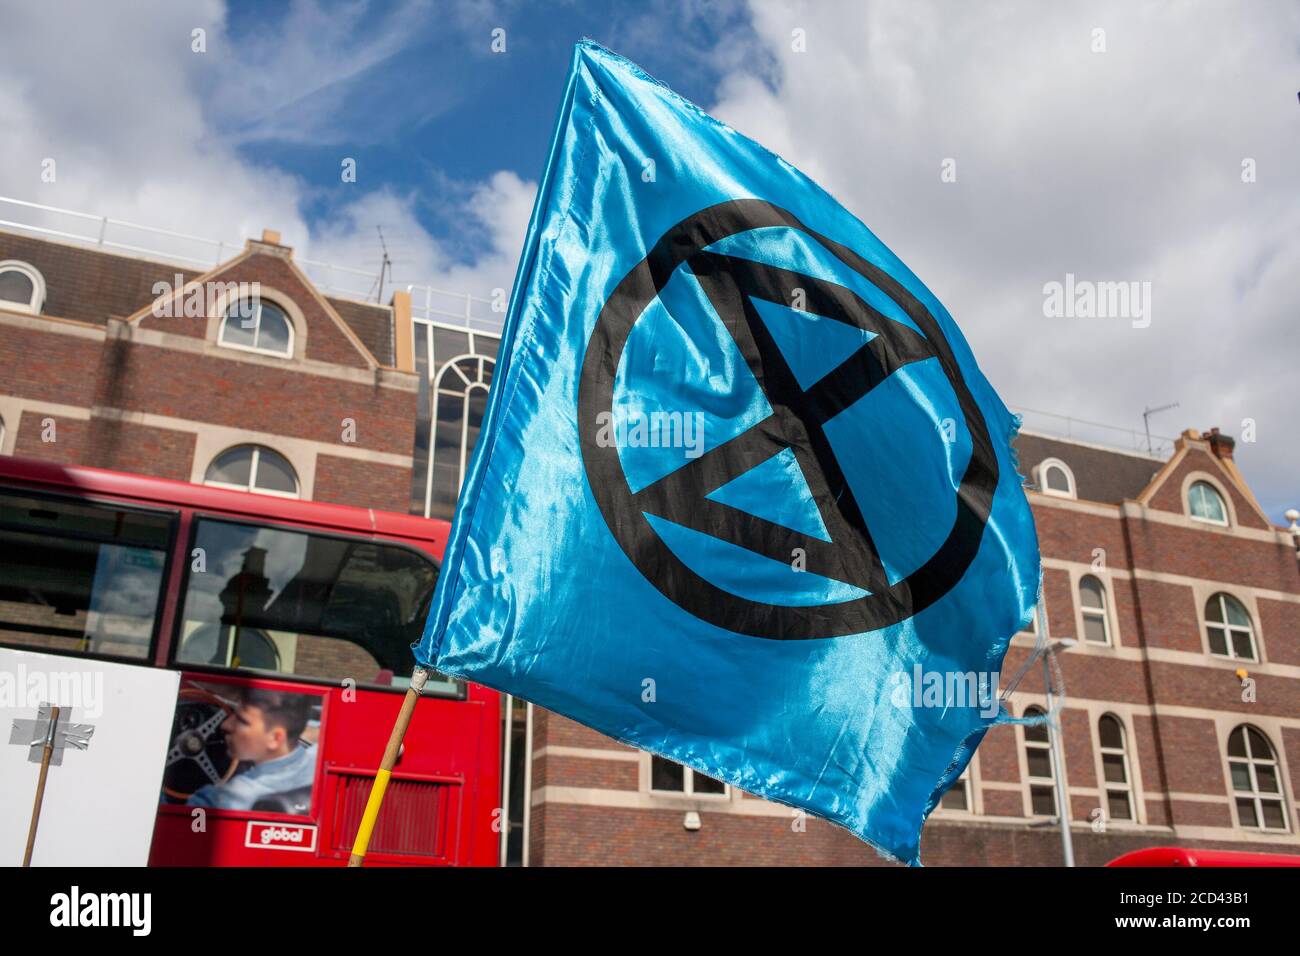 London, UK. 26th August 2020. Blue Extinction Rebellion flag flies outside Barclays Bank, Clapham Junction, South London. XR continue their ’Sharklays’ campaign, investigating Barclays Bank for crimes against humanity and the planet. XR state that Barclays is now the biggest European investor in fossil fuels. Credit: Neil Atkinson/Alamy Live News Stock Photo